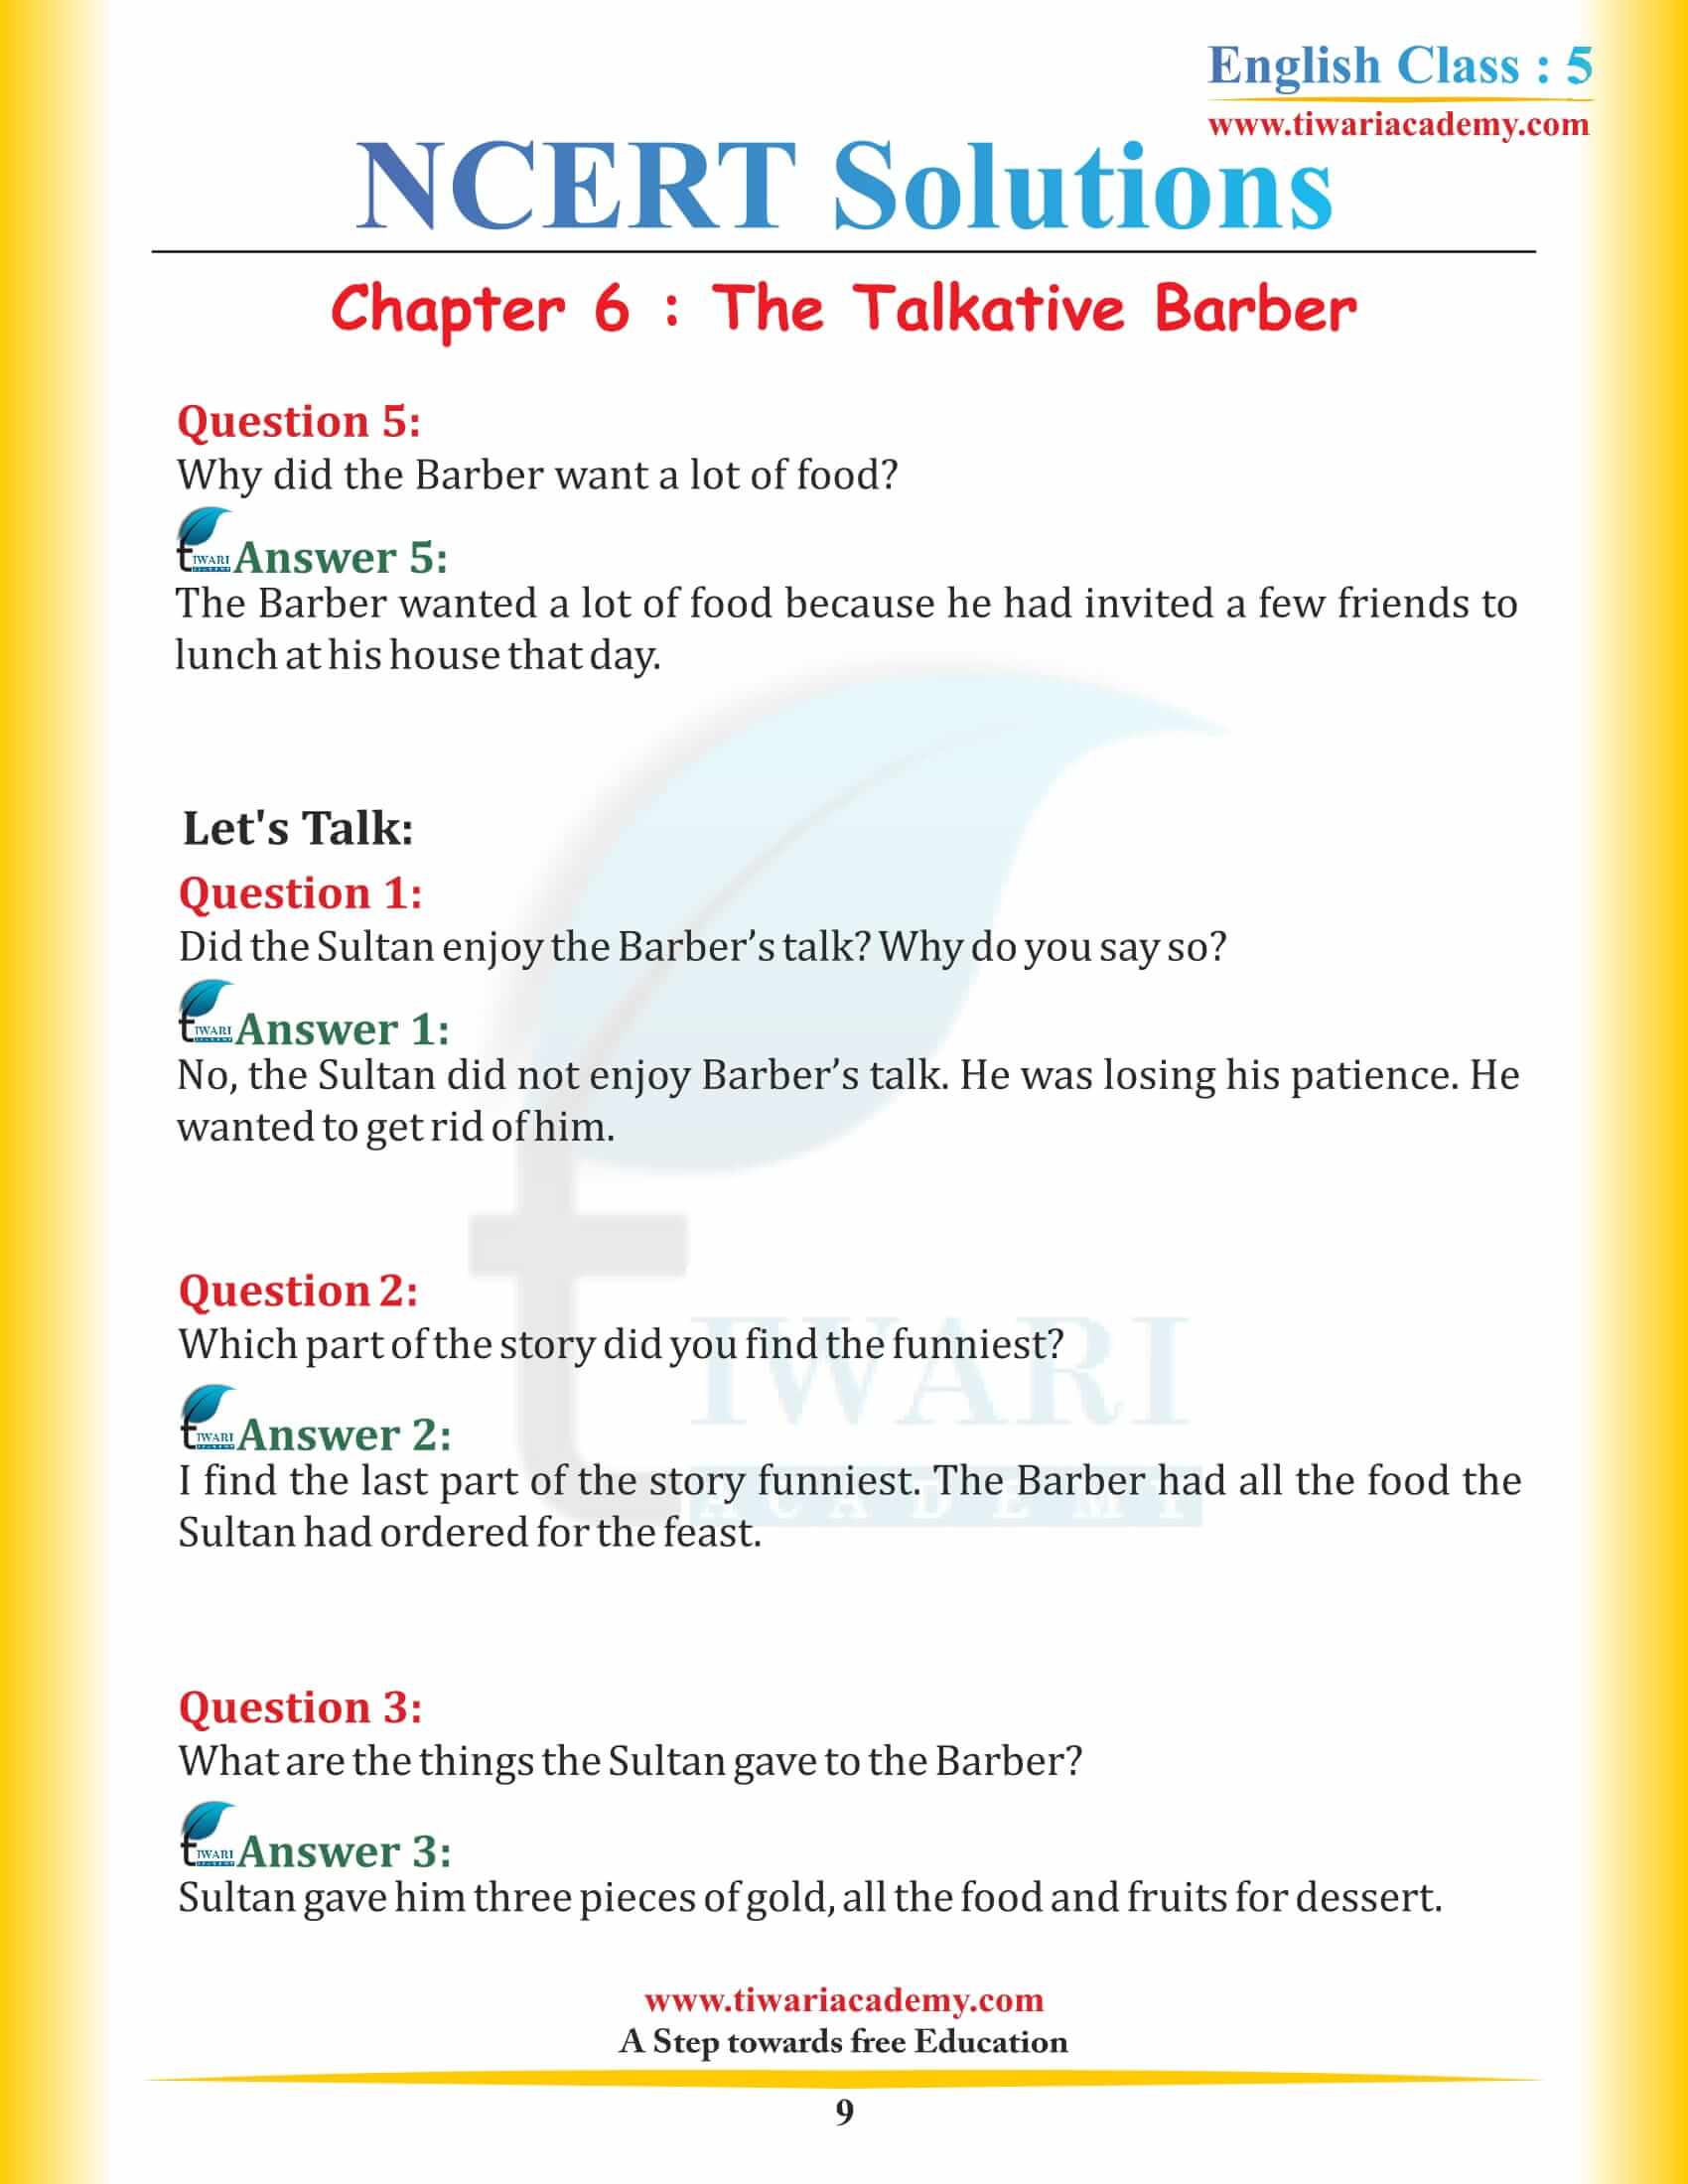 NCERT Solutions for Class 5 English Chapter 6 The Talkative Barber in Hindi Medium